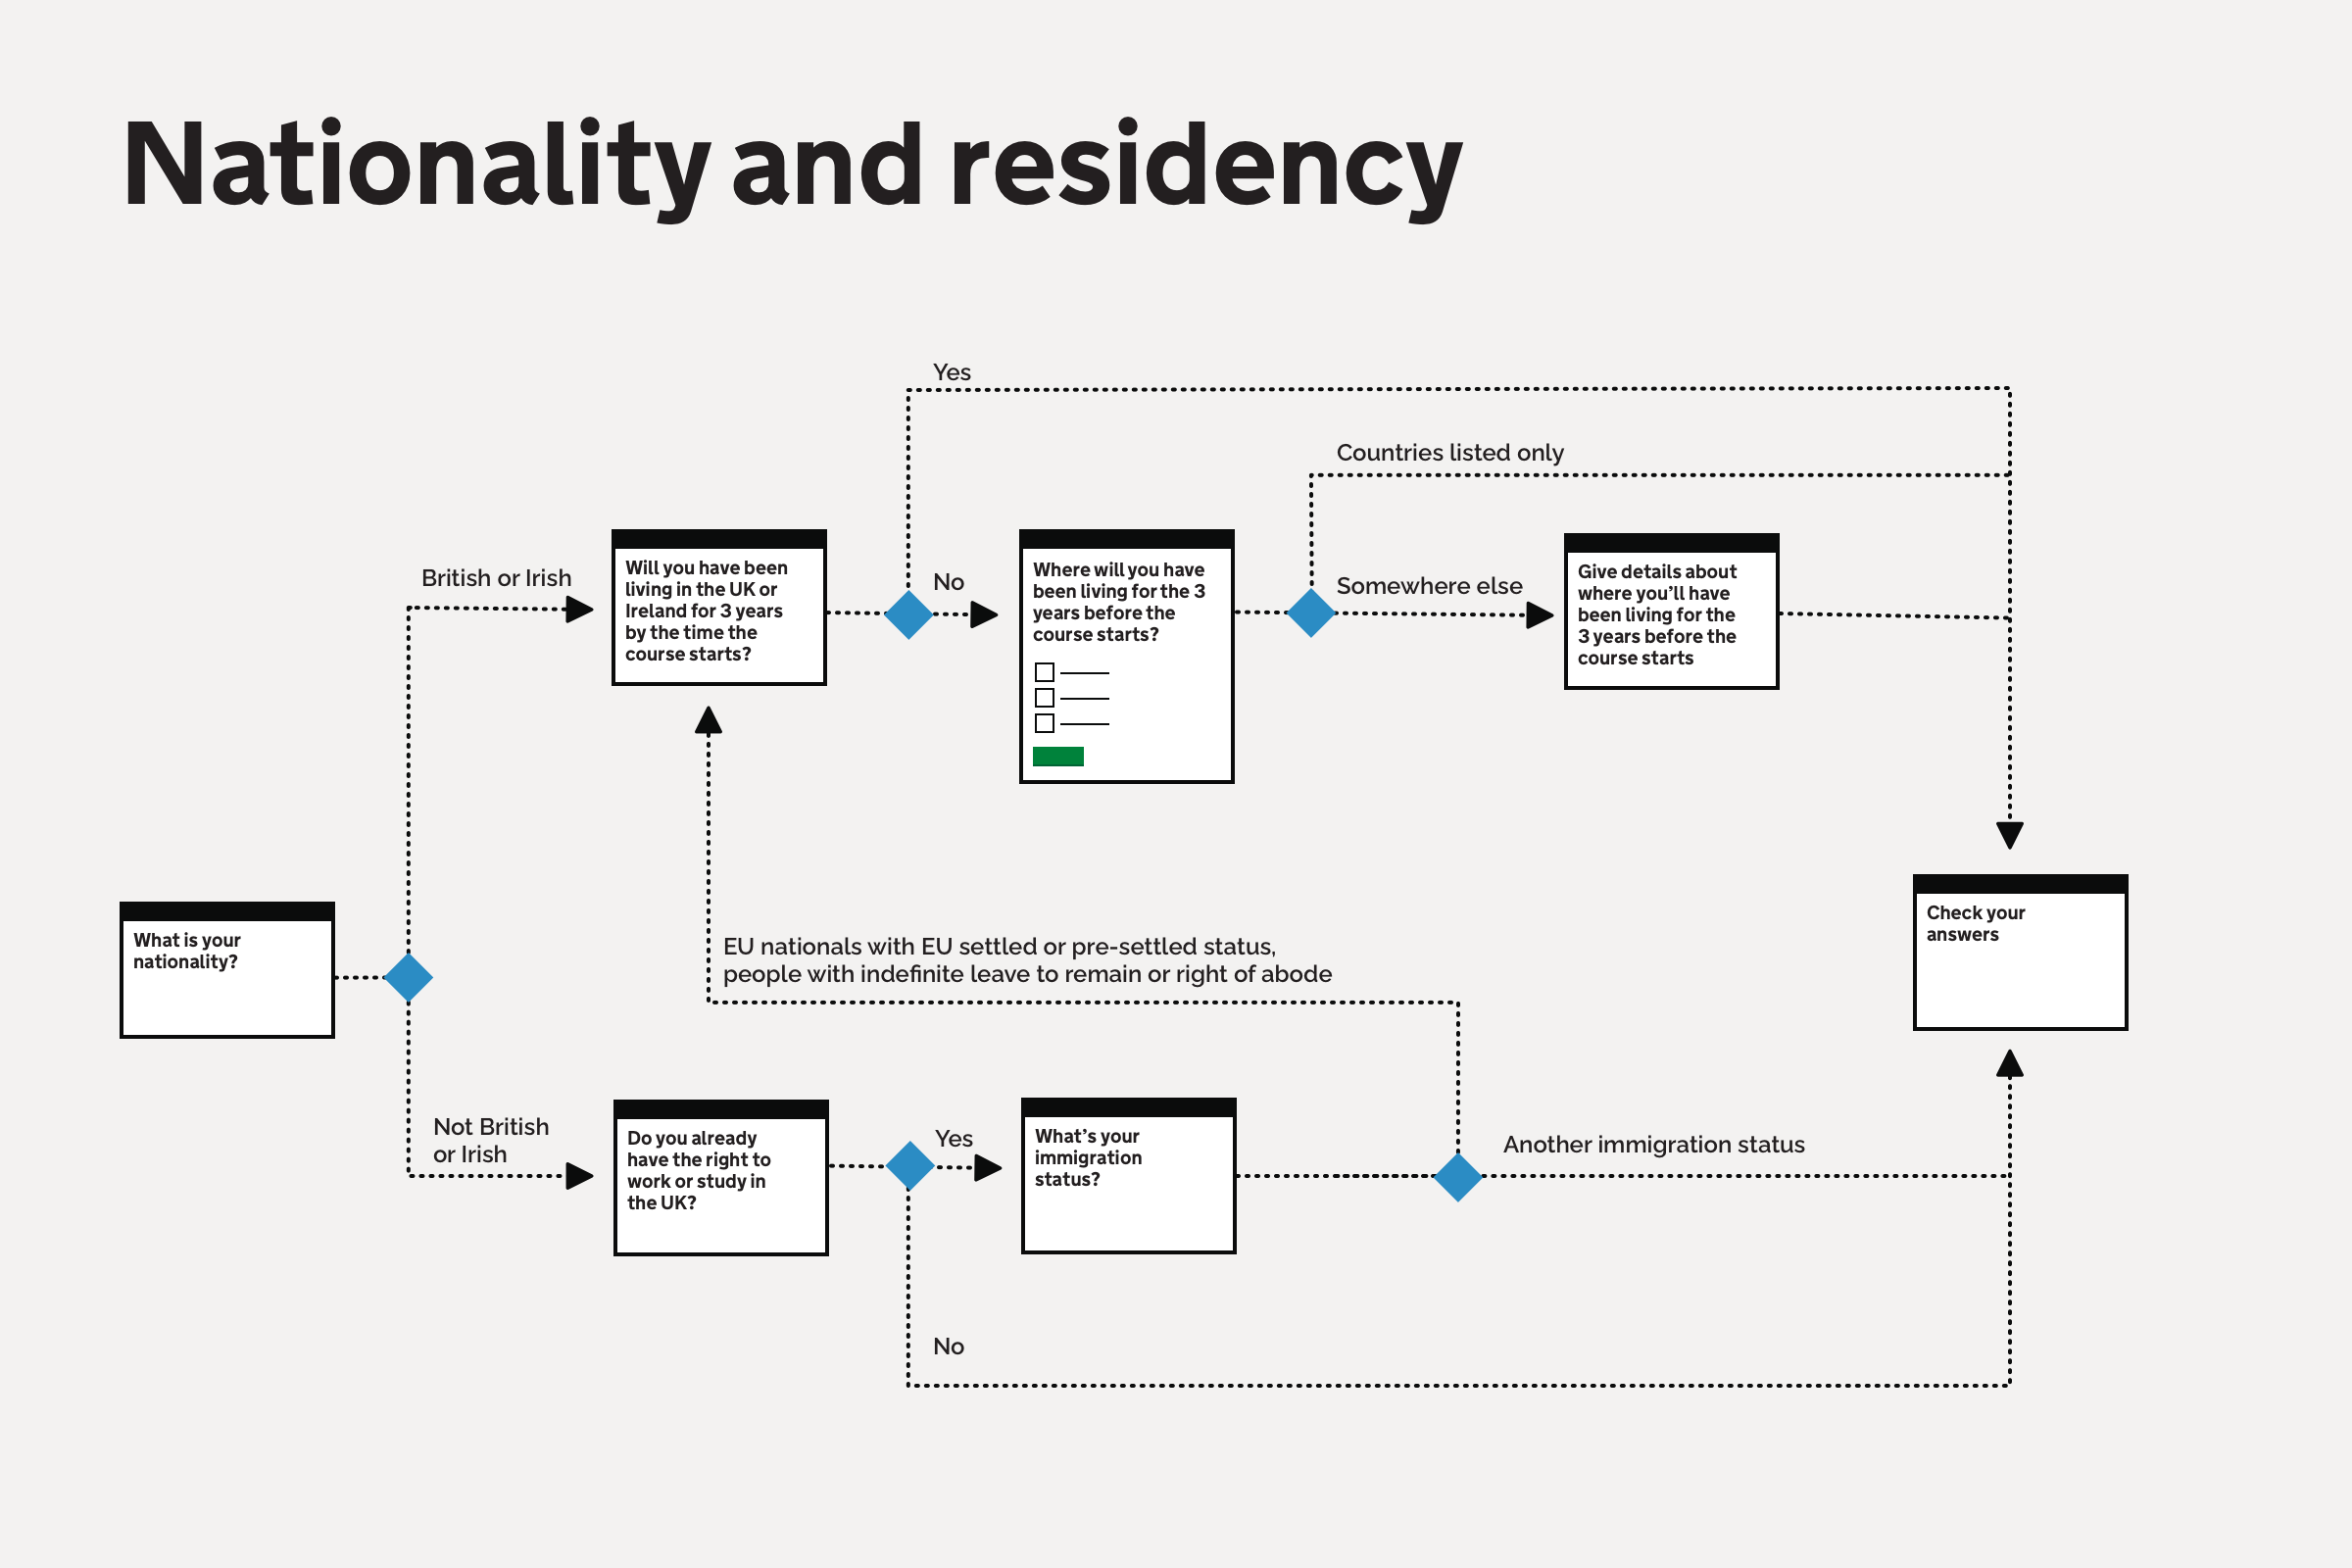 Flow diagram showing questions related to nationality and residency